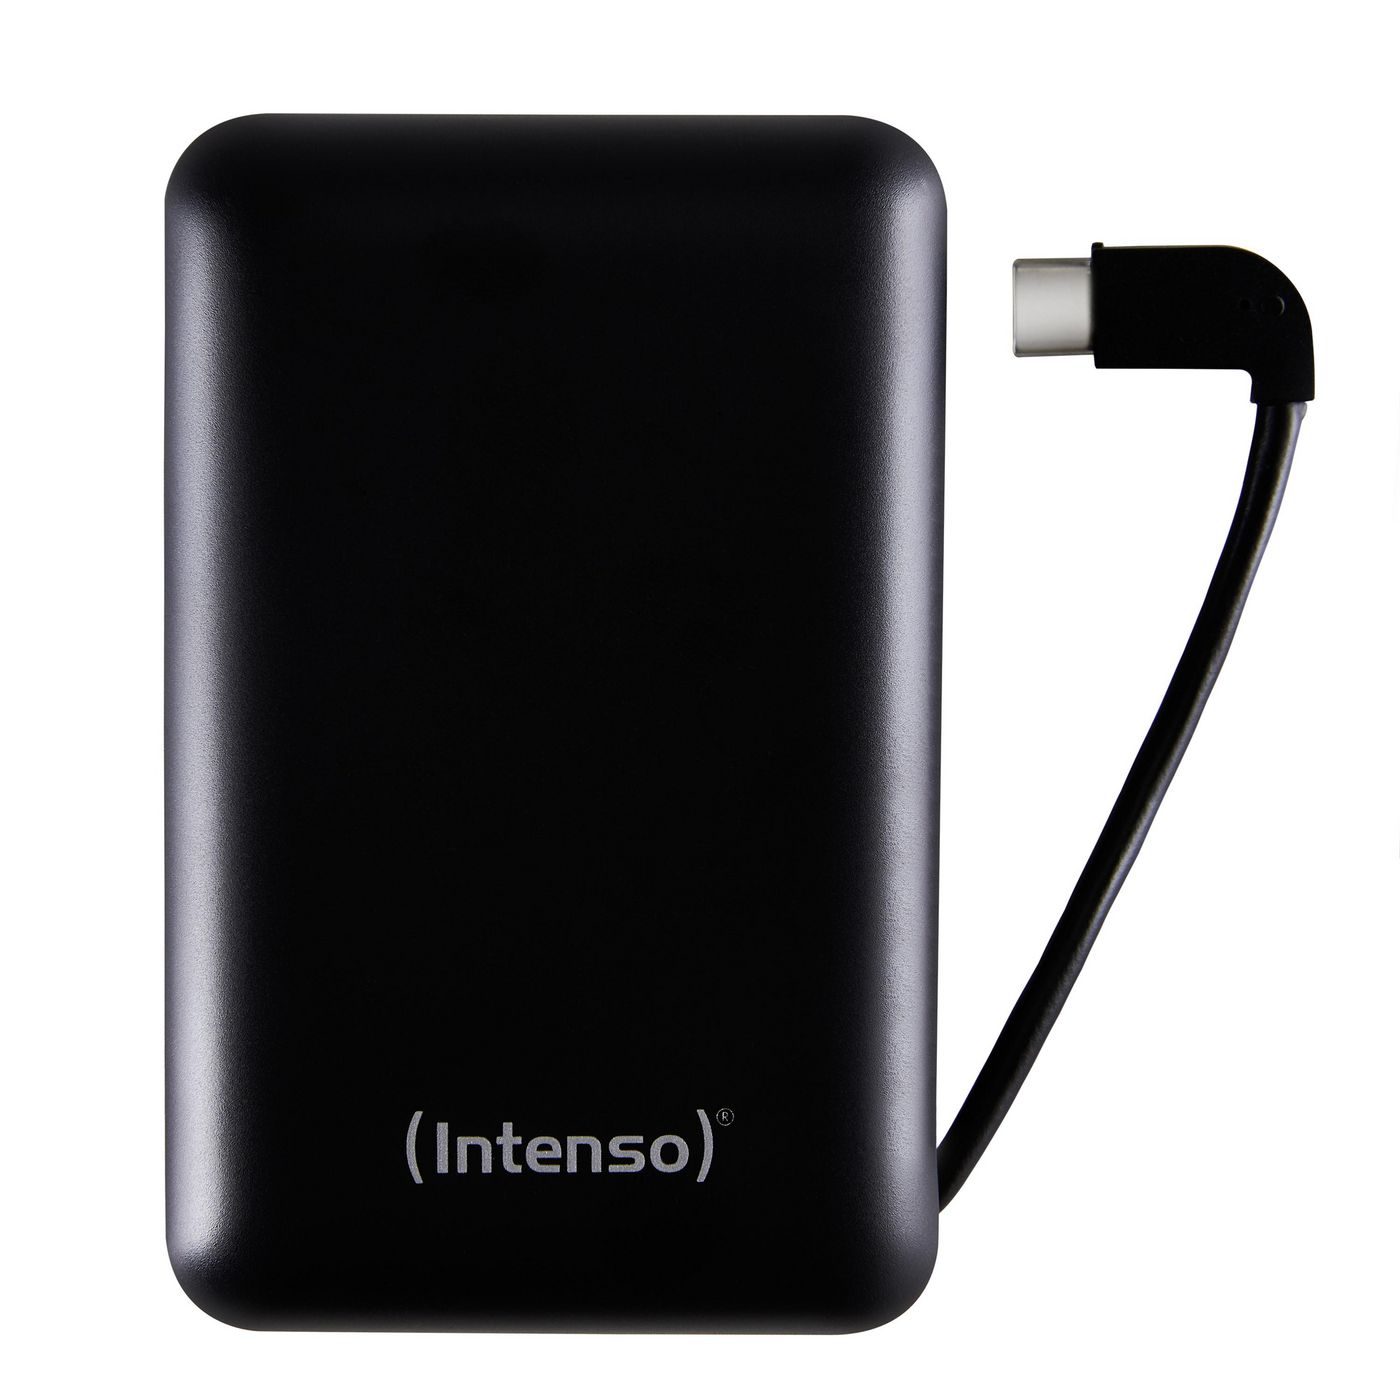 Intenso 7314530 W128257358 Power Bank Lithium Polymer 